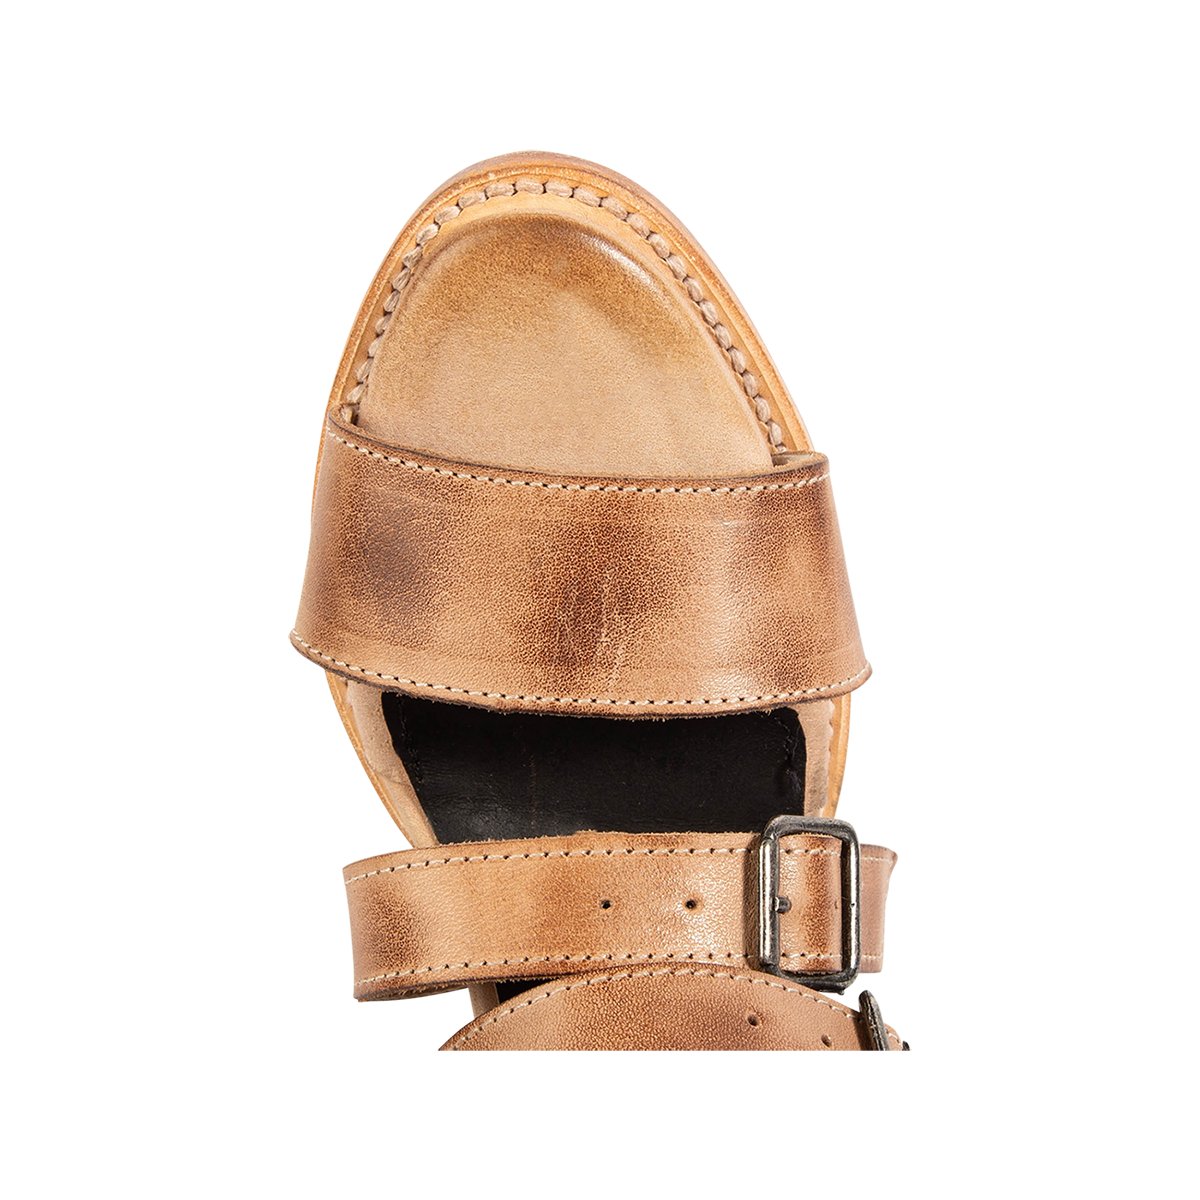 Top view showing open toe construction on FREEBIRD women's Country natural leather sandal